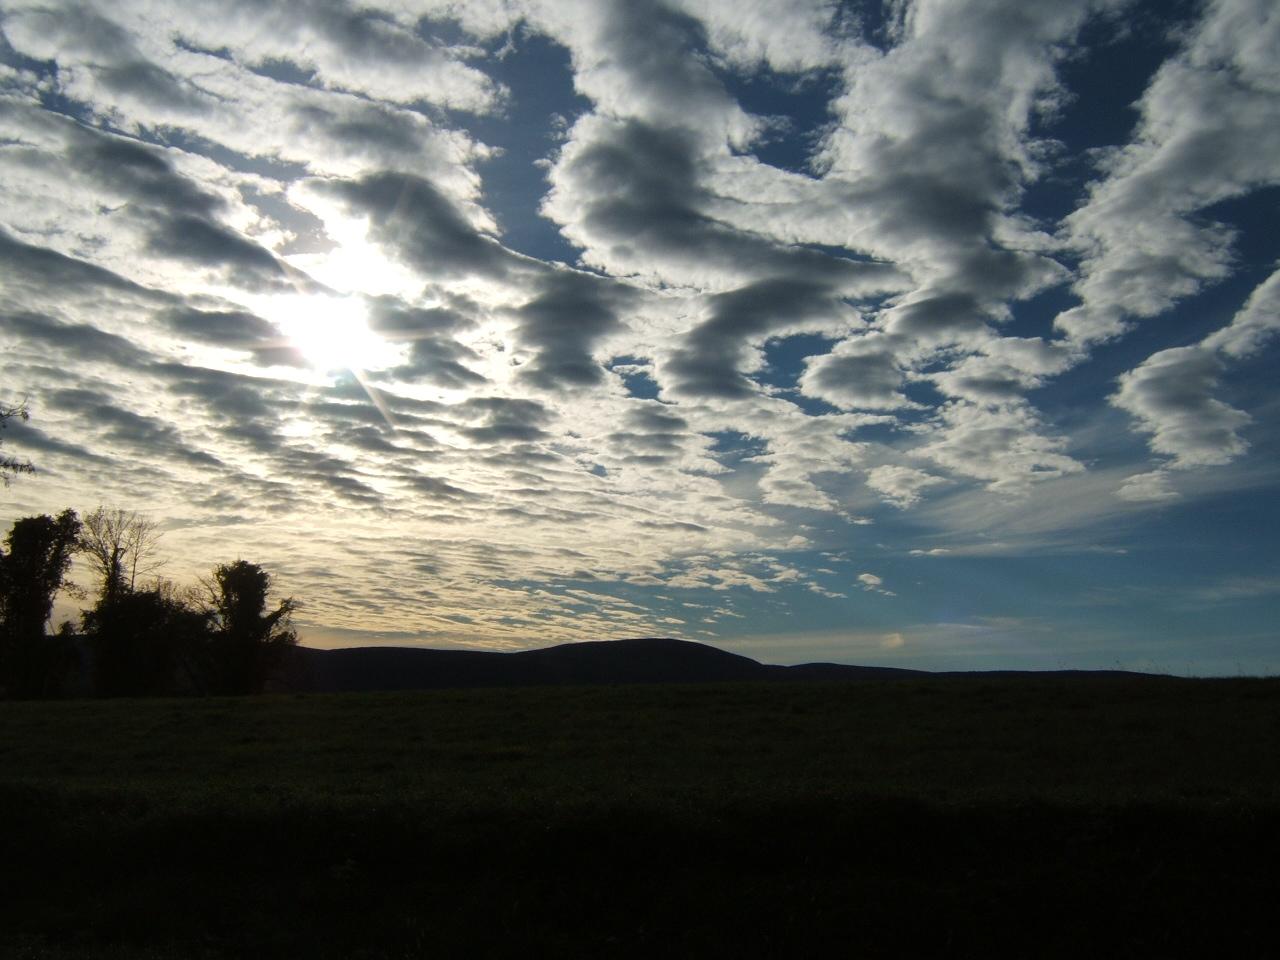 Sunset and Clouds Over the Berkshires (user submitted)